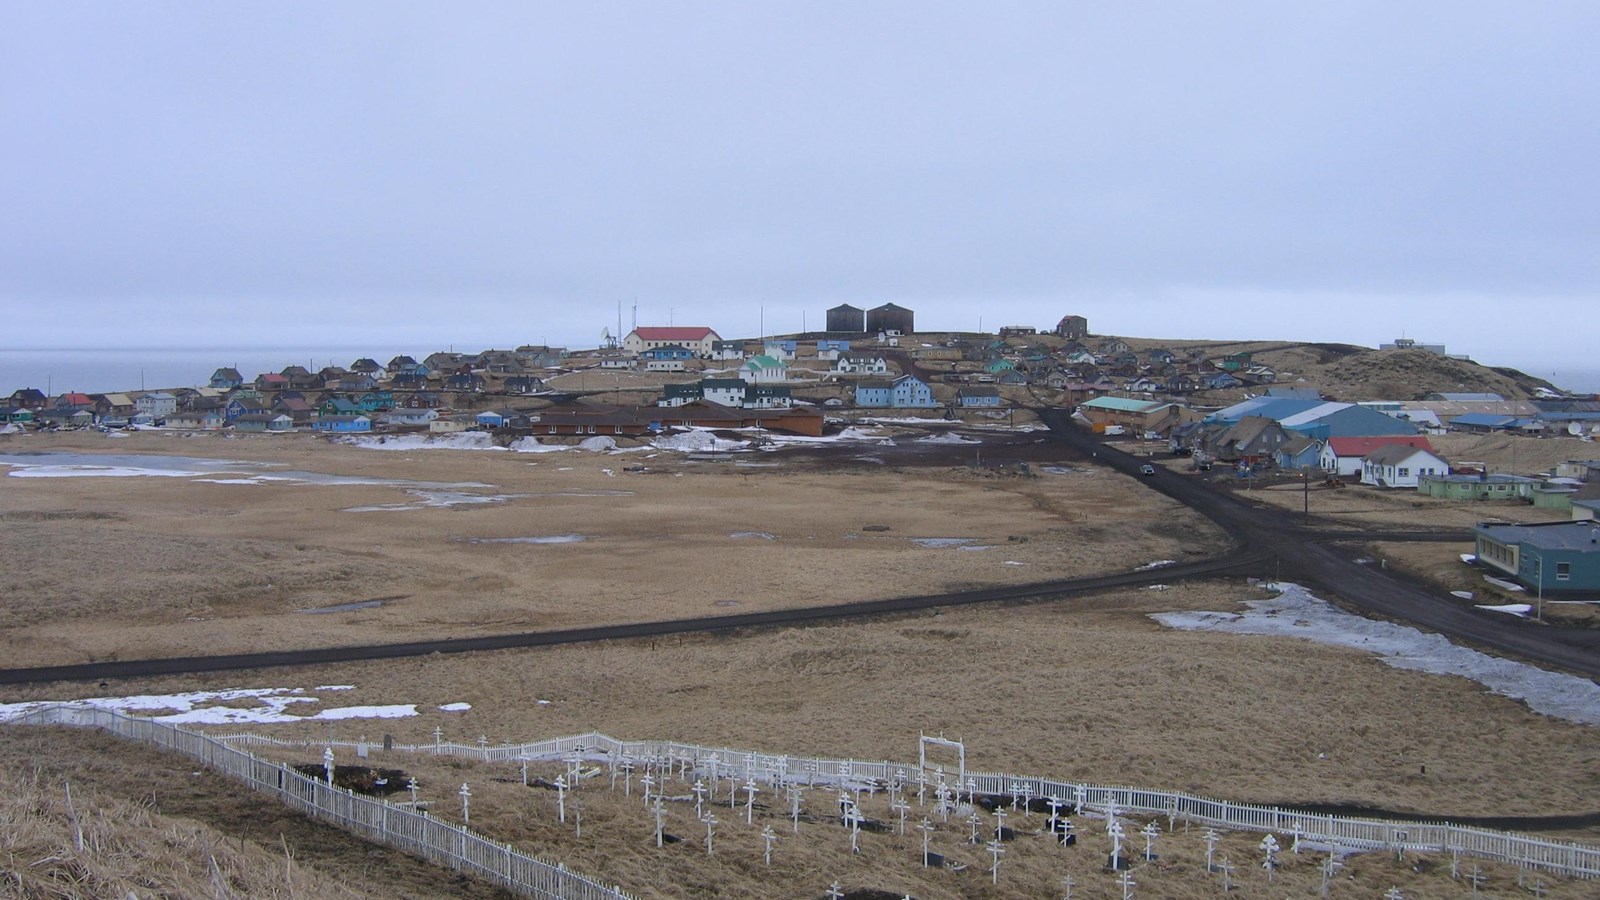 A large historic village is on the horizon and white fenced Russian Orthodox cemetery in foreground